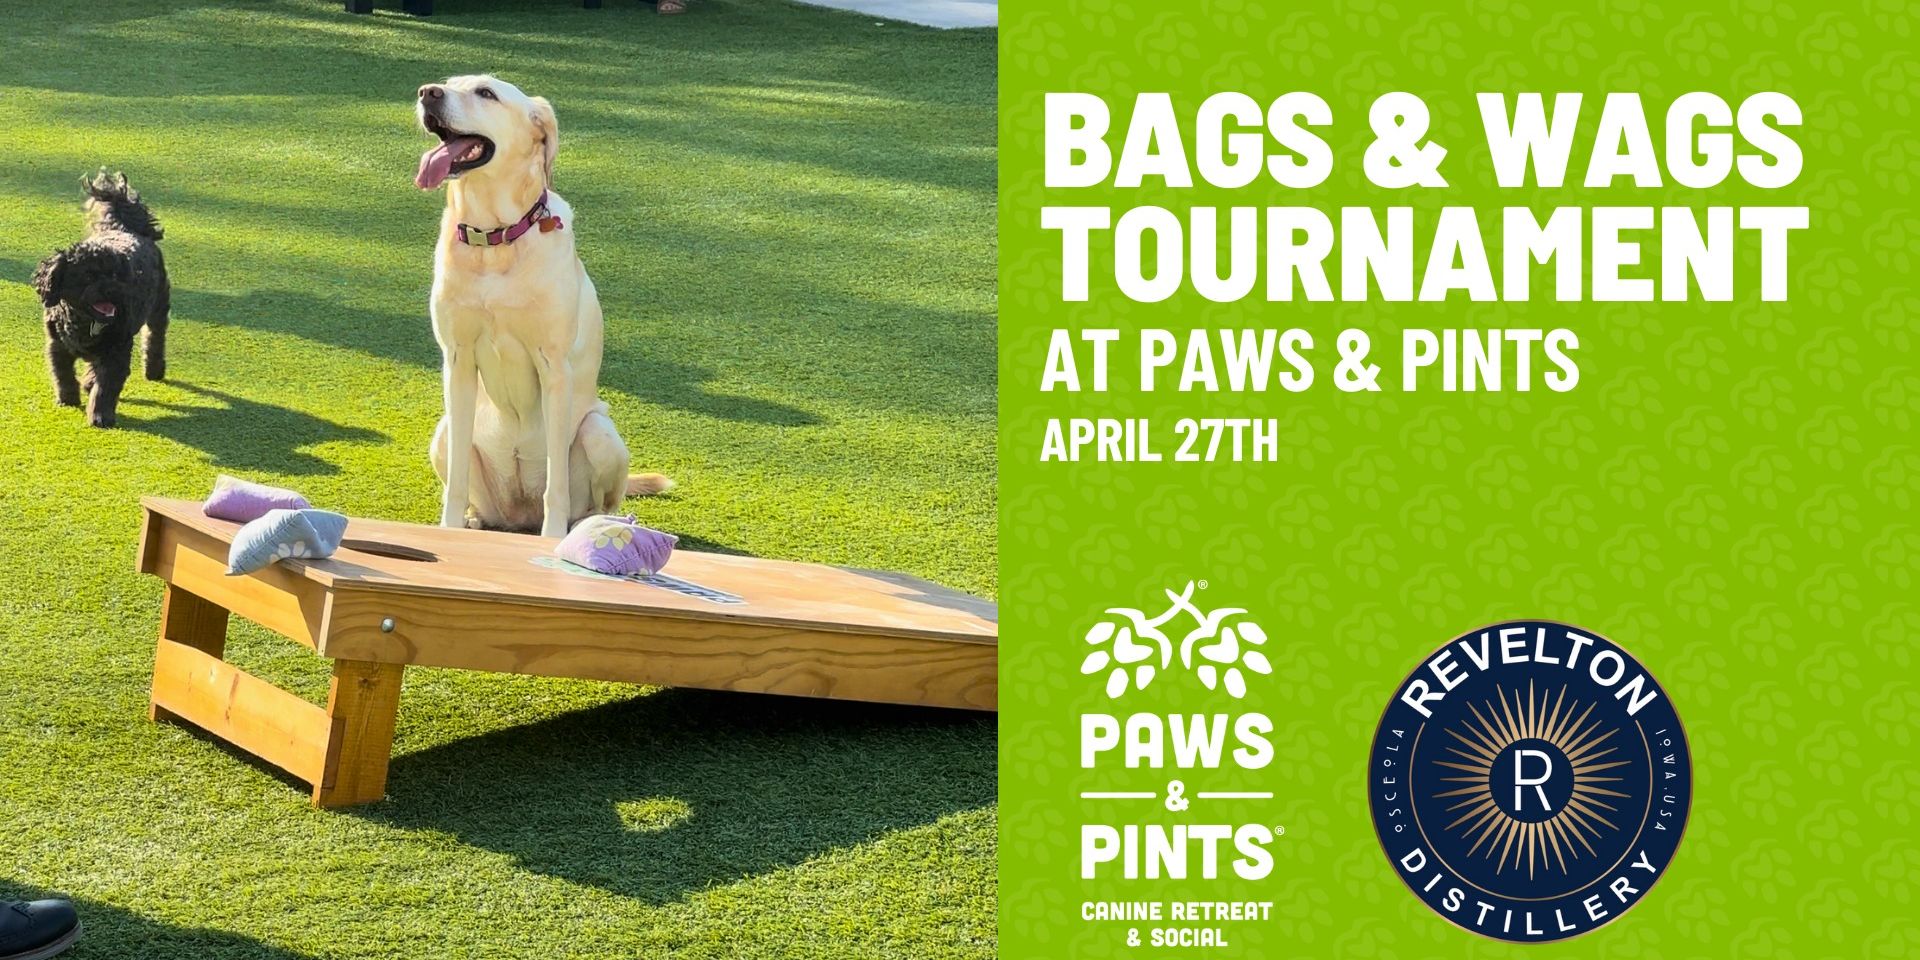 Bags & Wags Tournament promotional image